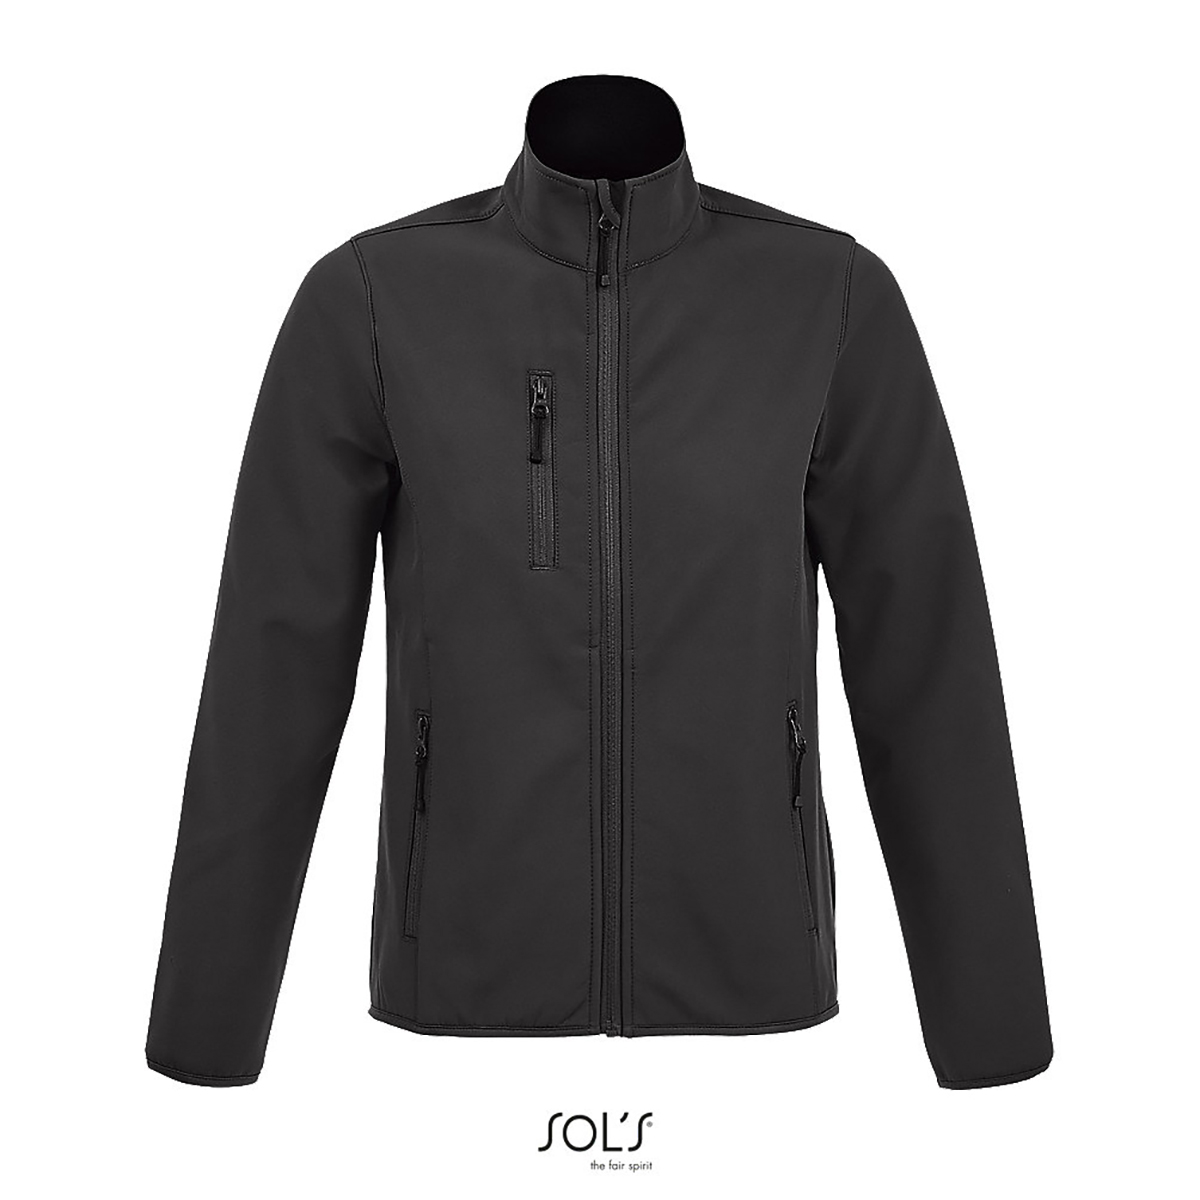 GIACCA DONNA SOFTSHELL FULL ZIP RADIAN SOLS